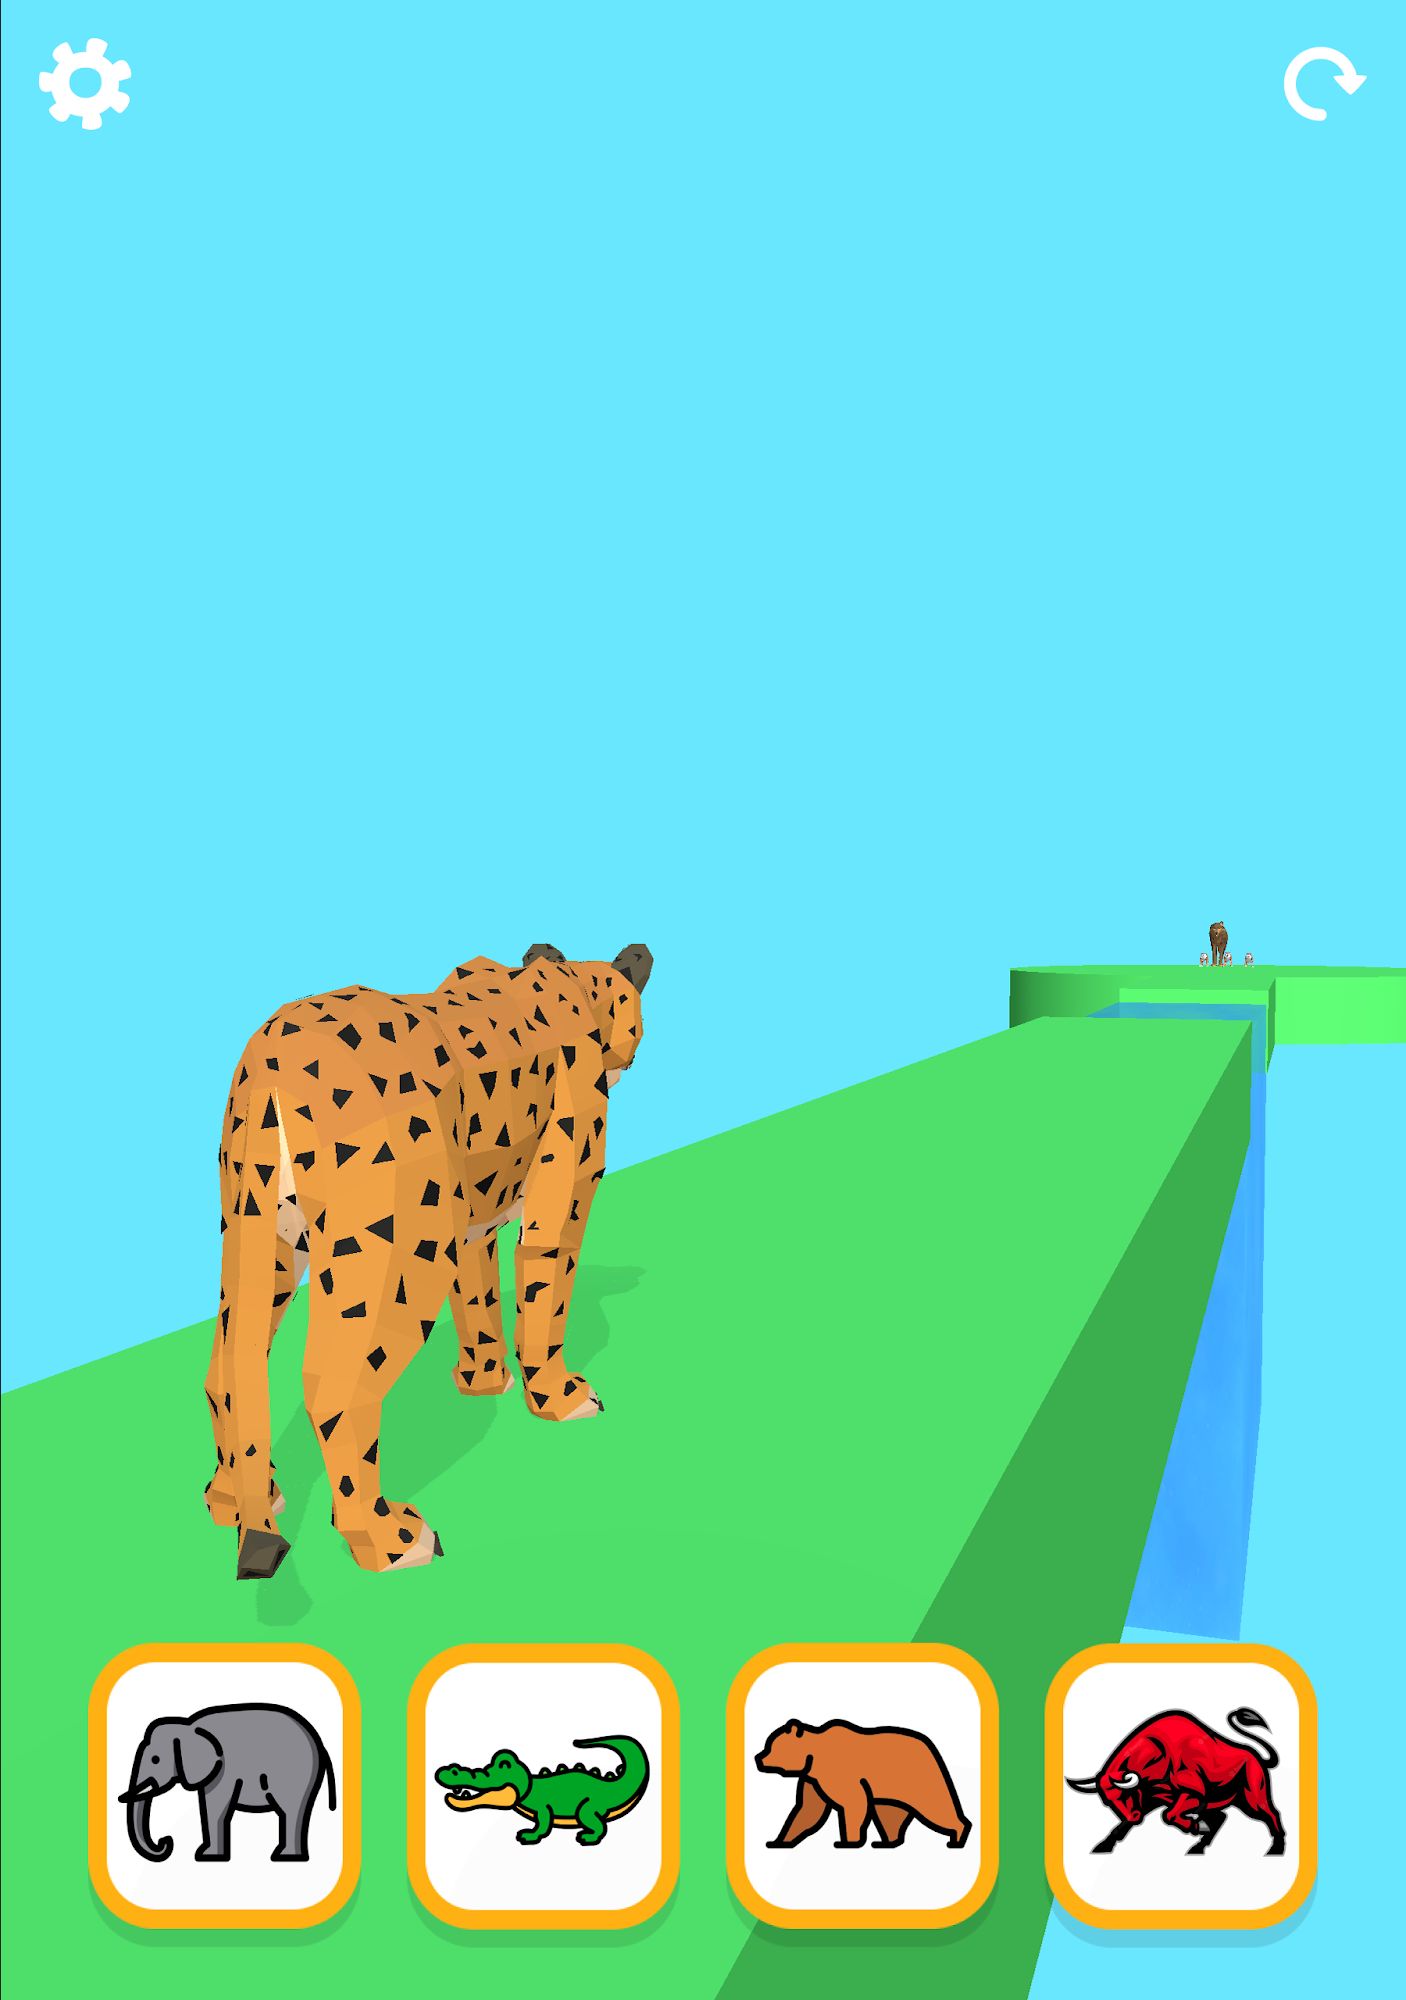 Move Animals - Android game screenshots.